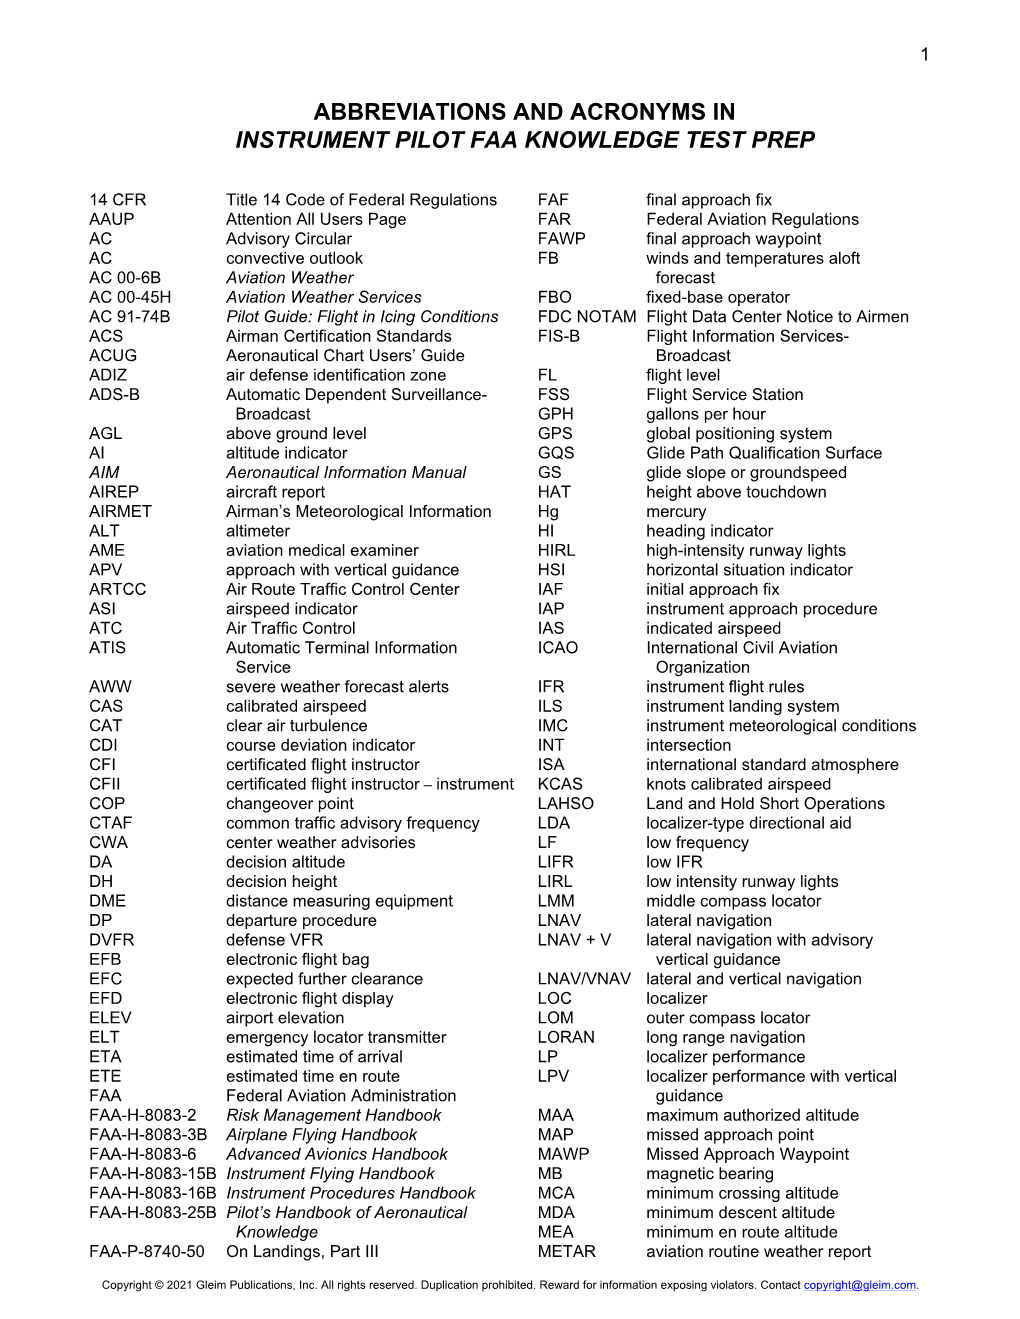 Abbreviations and Acronyms in Instrument Pilot Faa Knowledge Test Prep